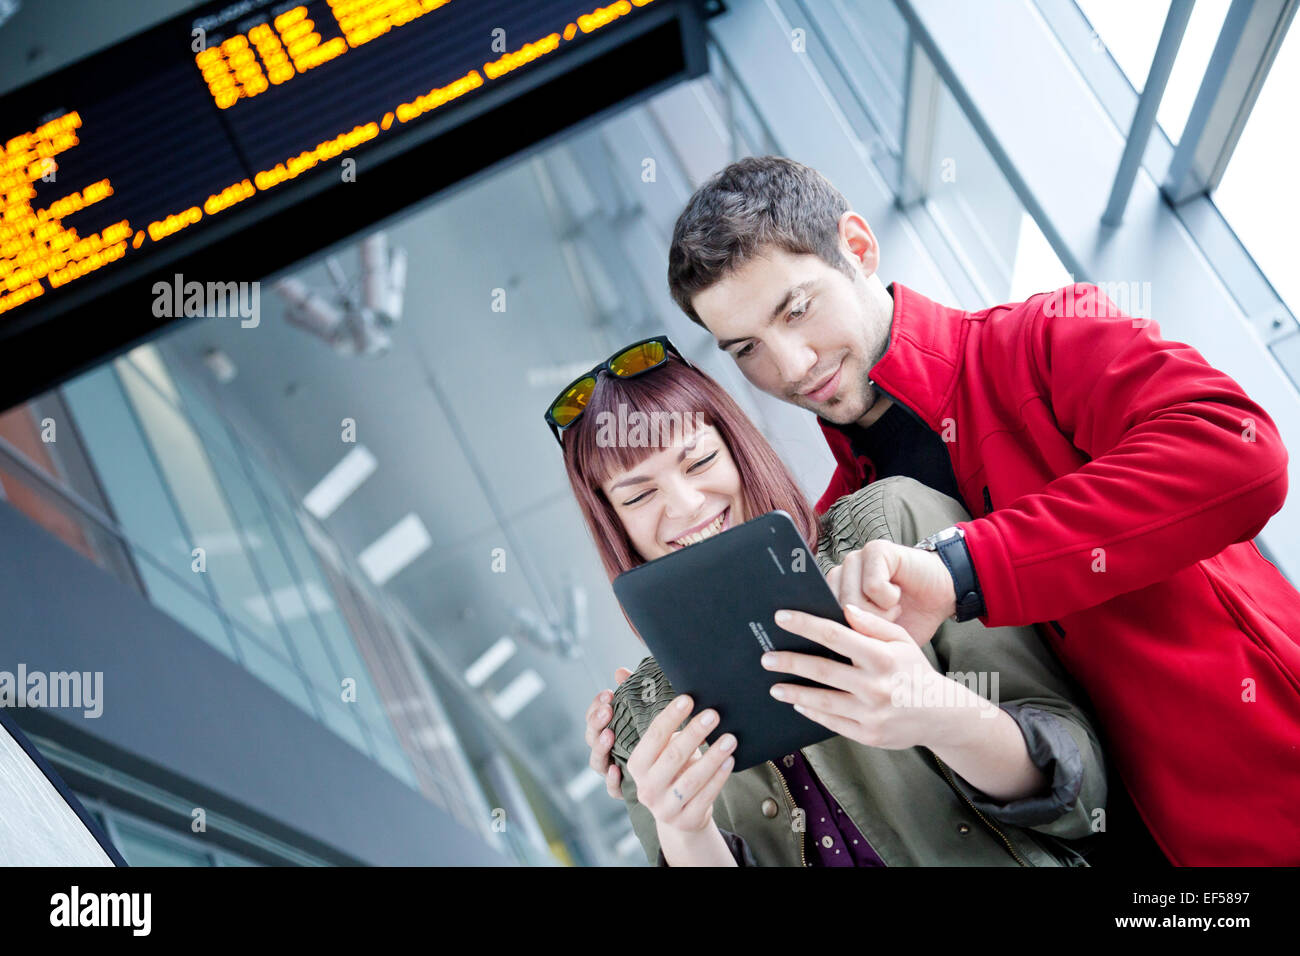 Young couple in airport building using digital tablet Stock Photo